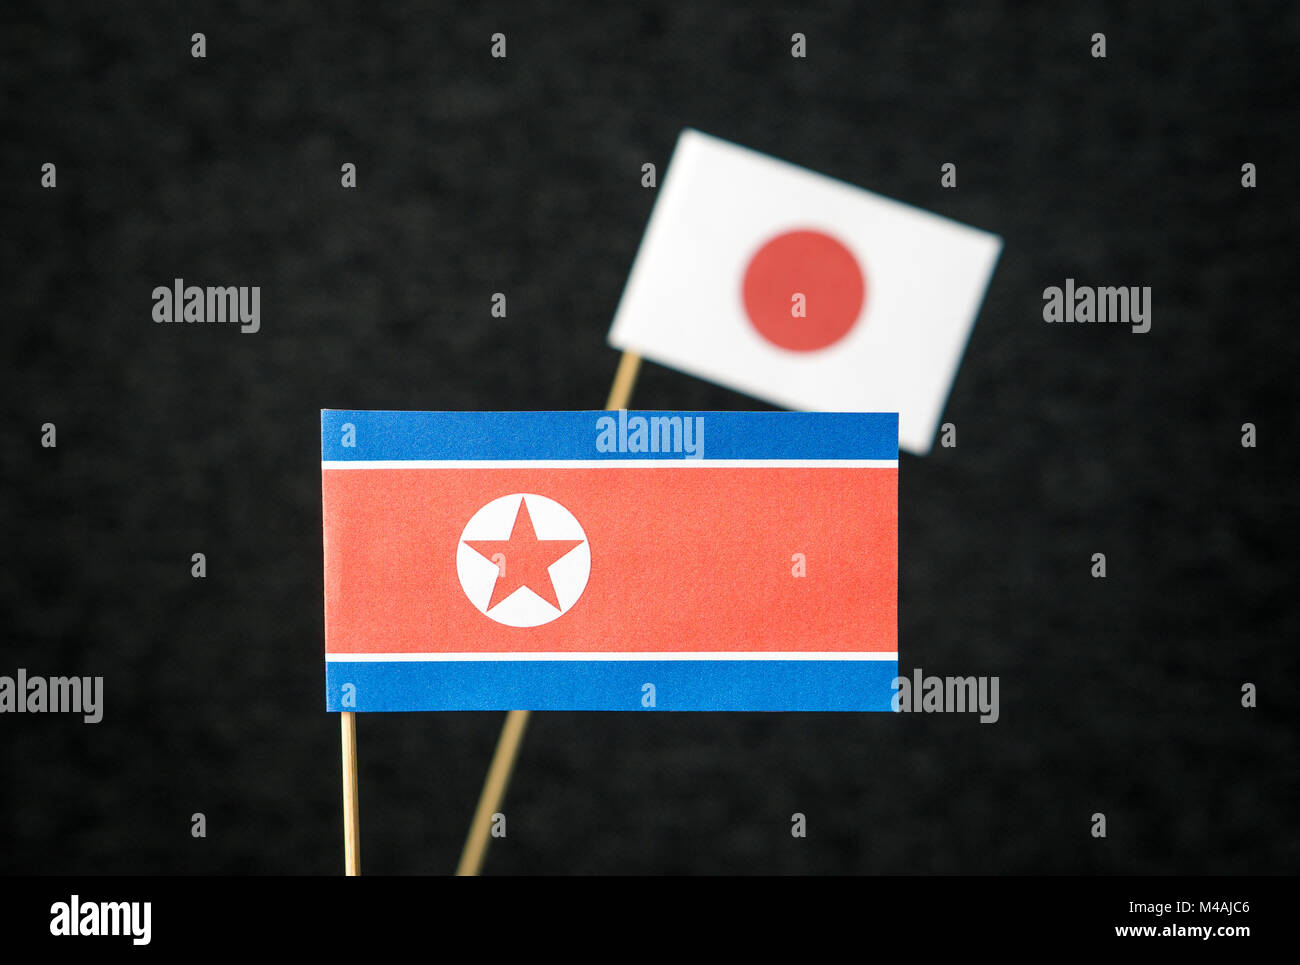 The flag of North Korea and Japan made from paper on wooden stick against dark background. Stock Photo